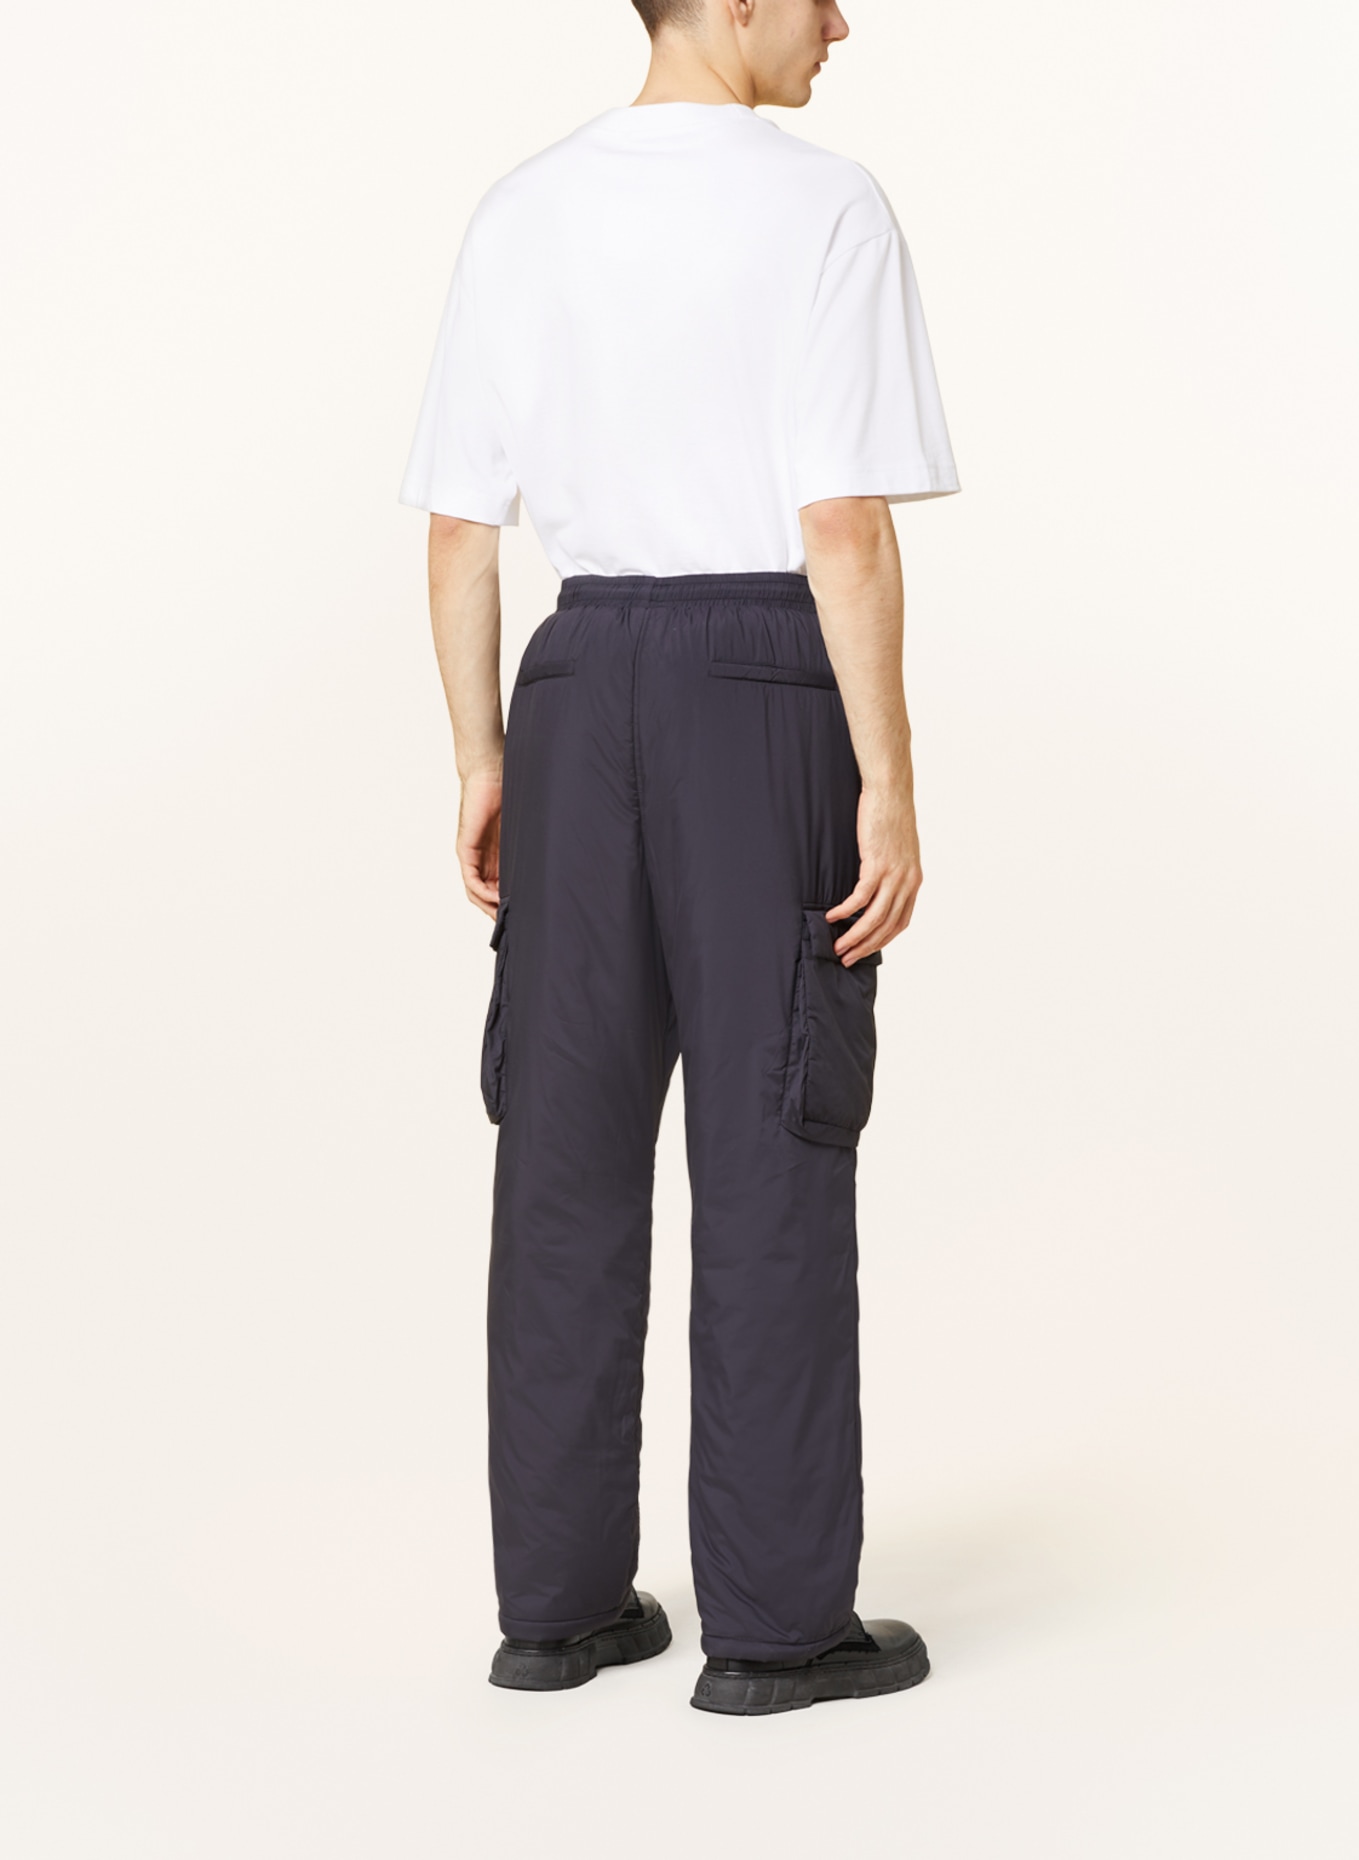 DAILY PAPER Cargo pants RONDRE in dark blue